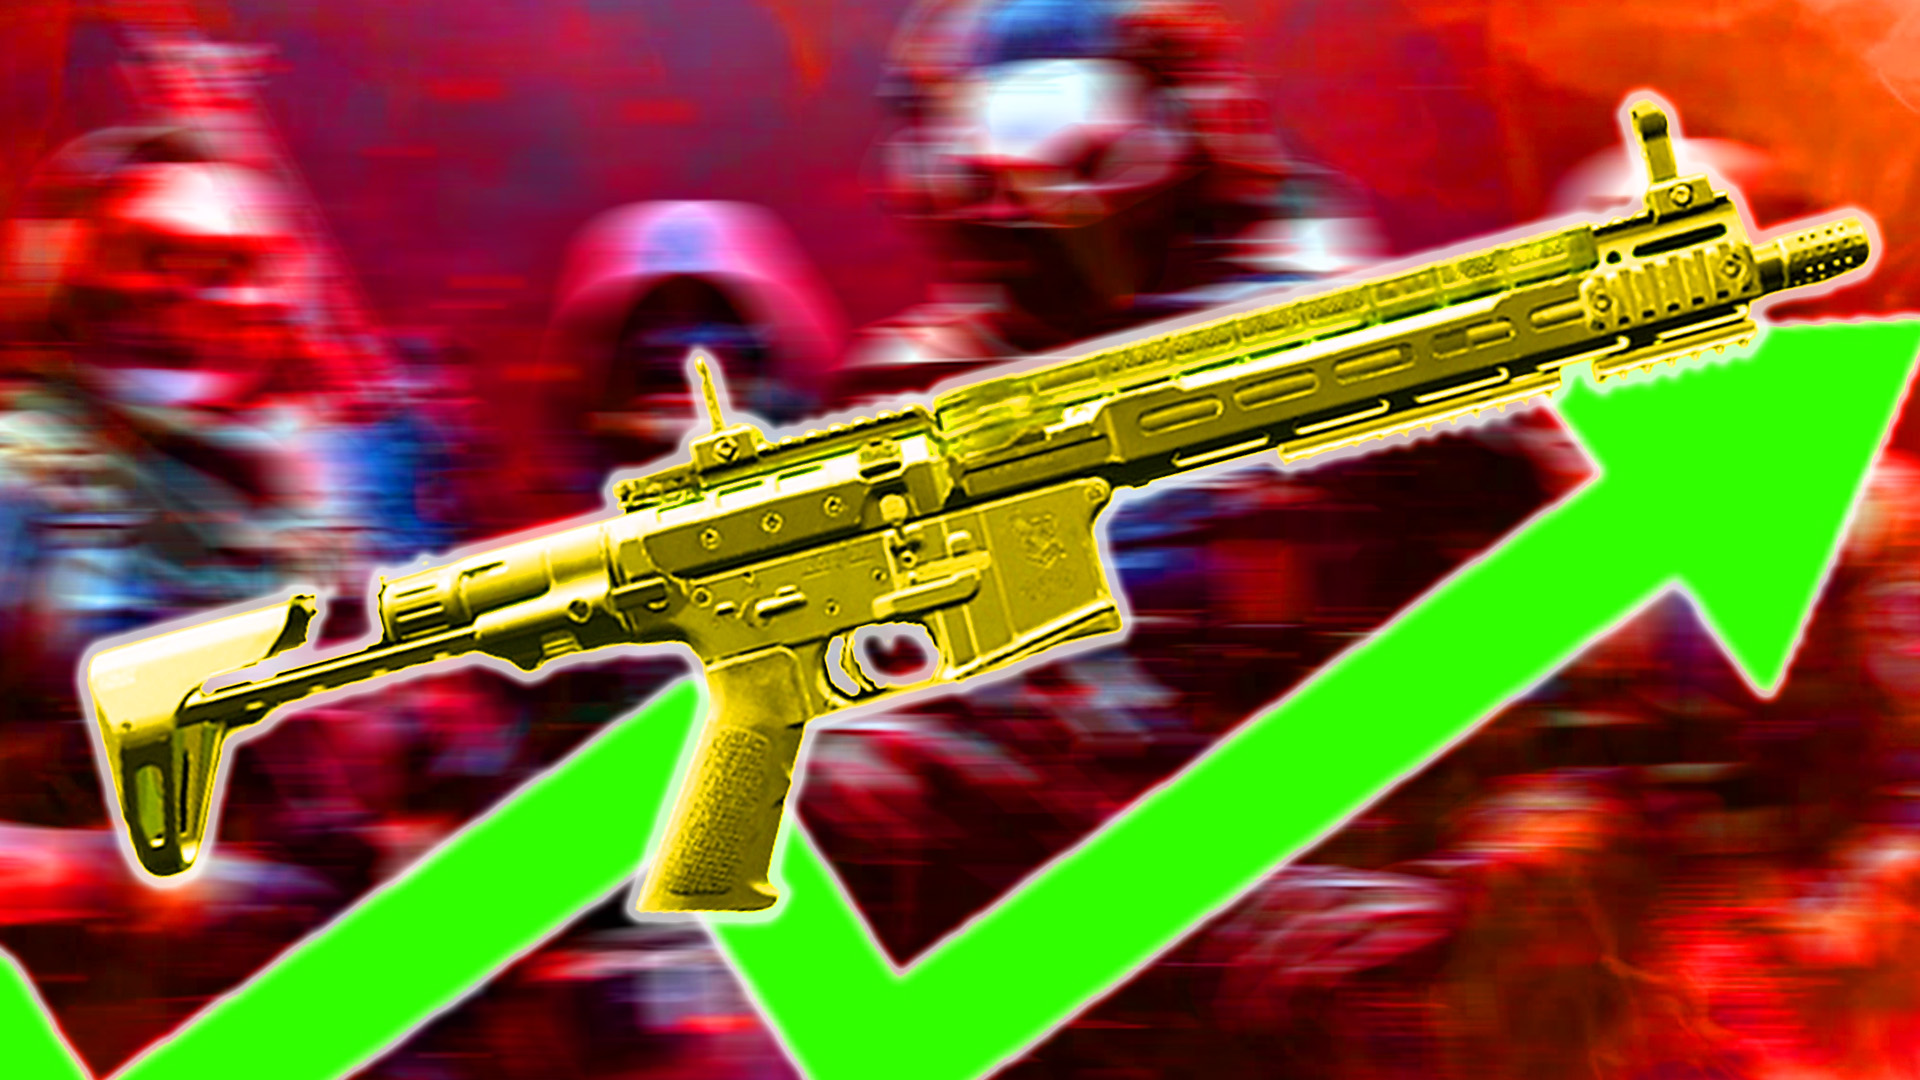 The SMG Meta in Warzone Season 6: Best SMGs and Loadouts